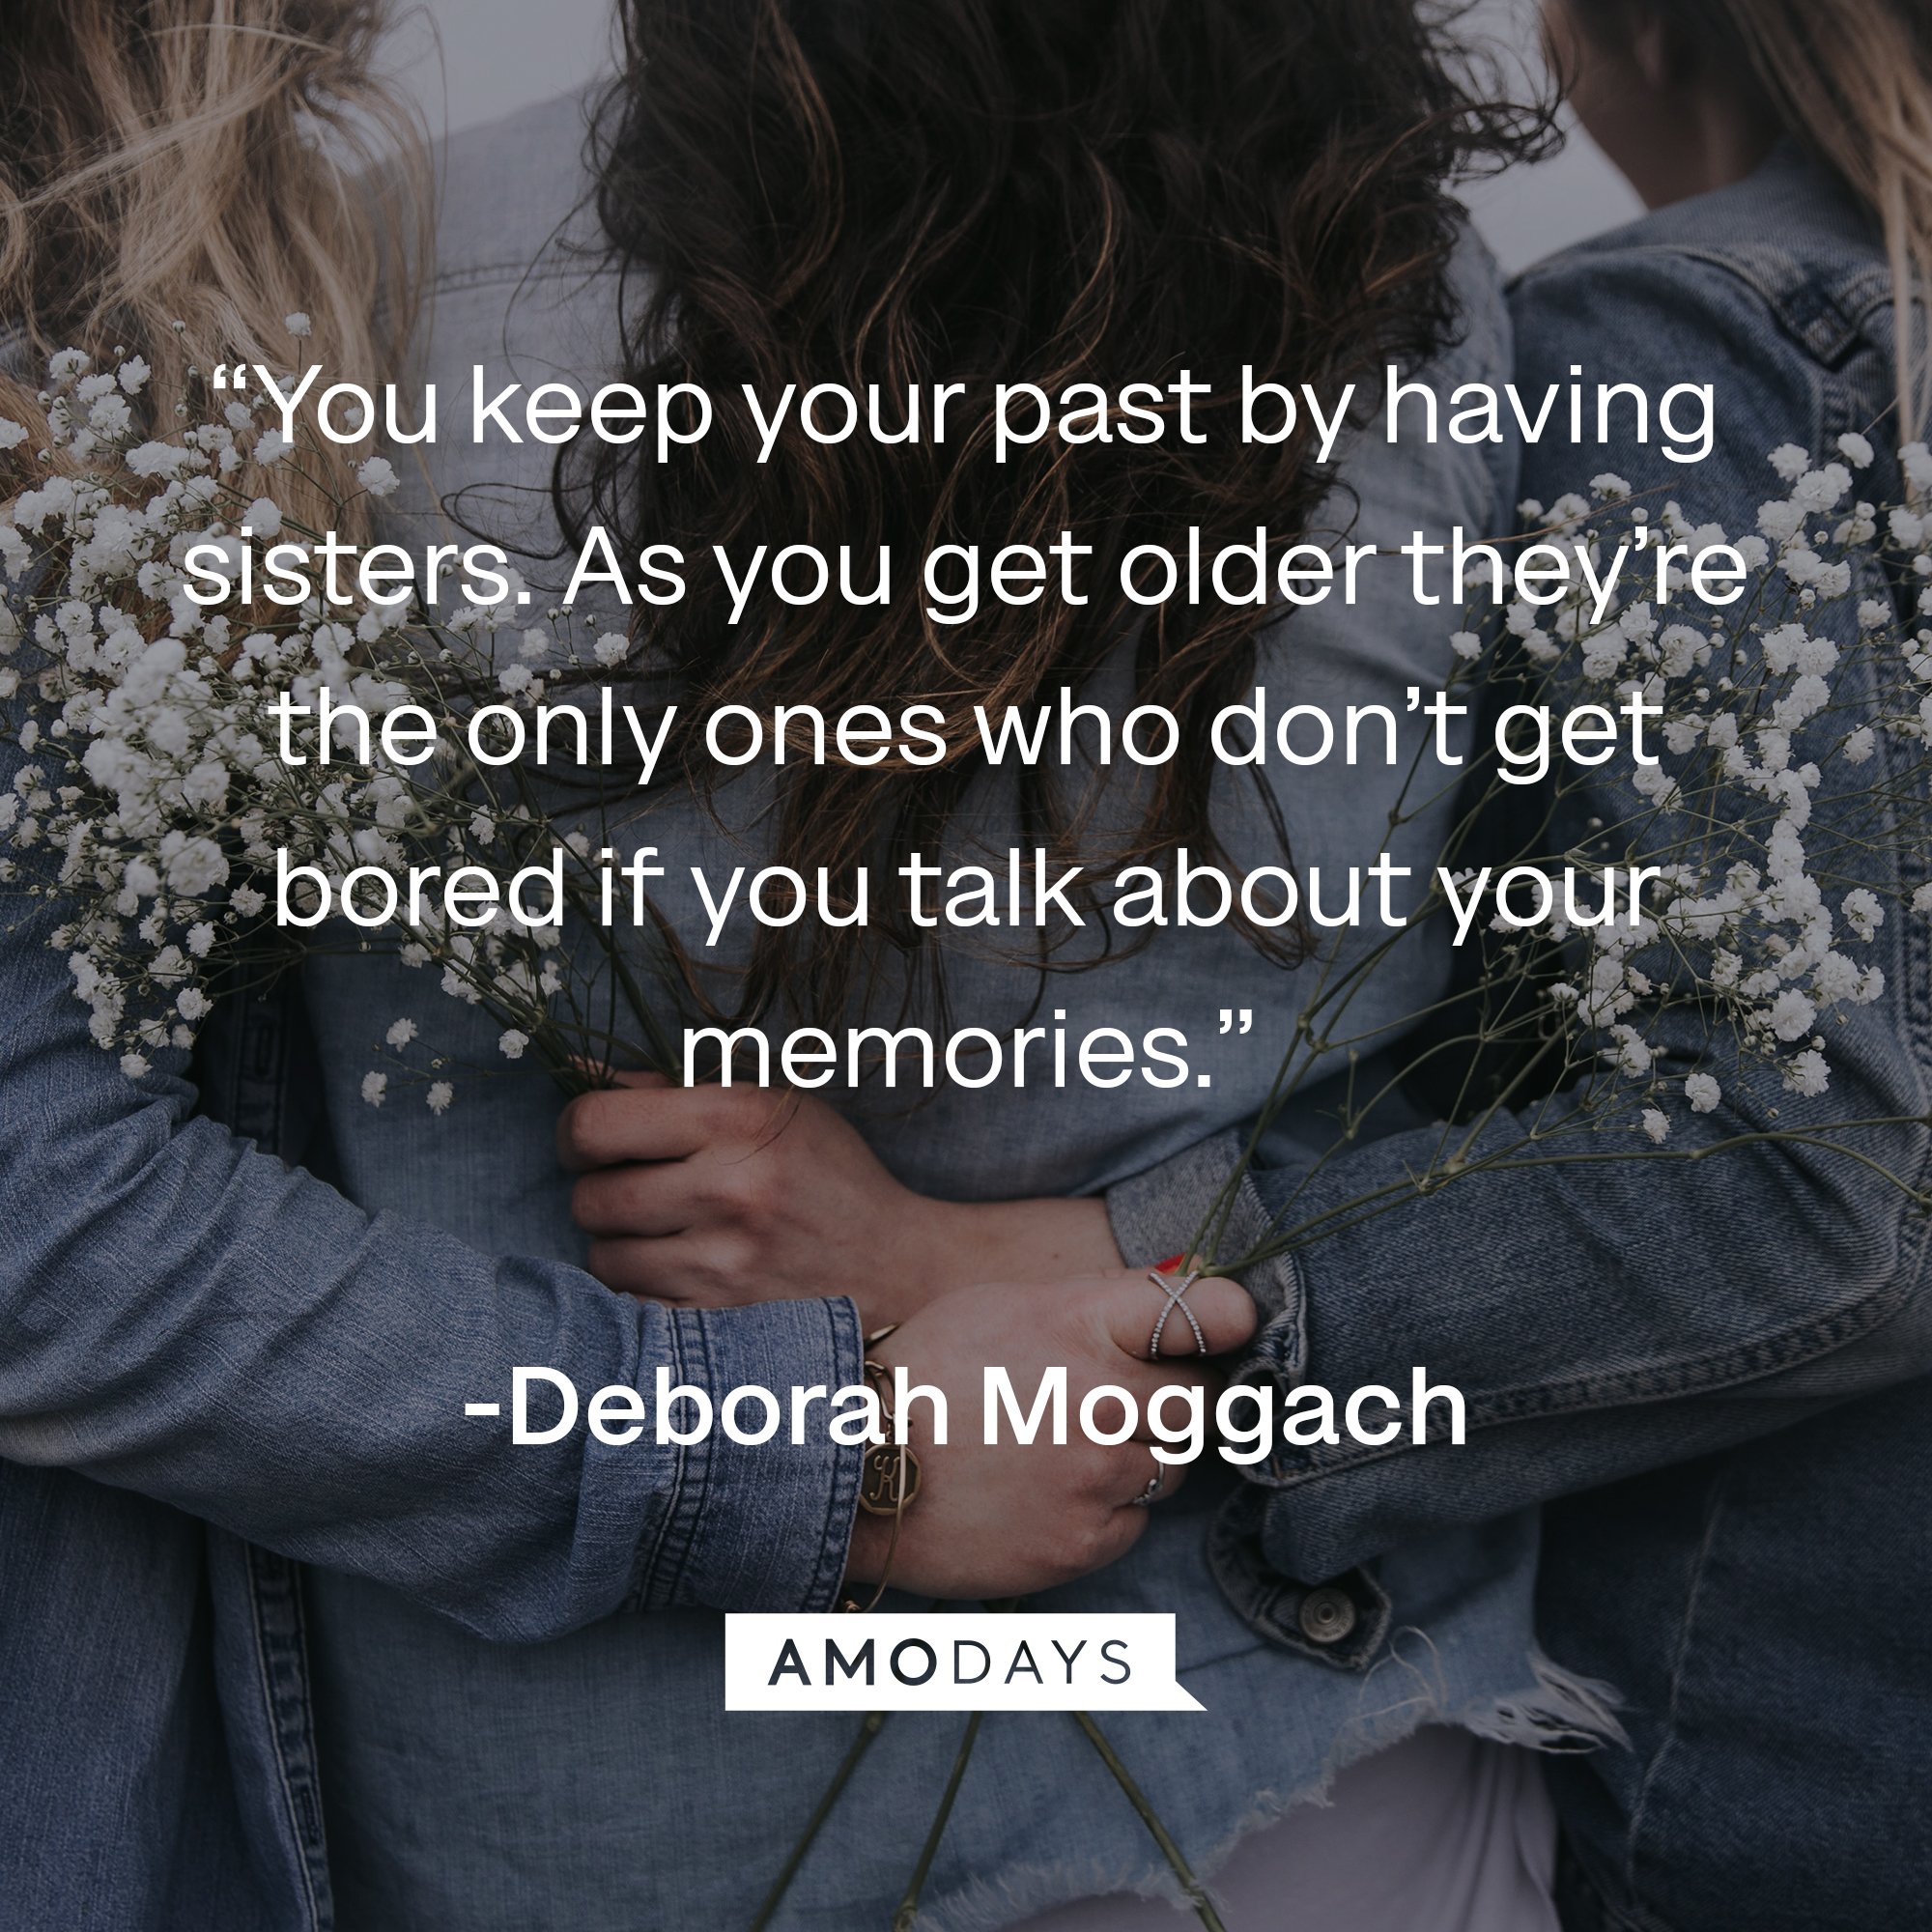 Deborah Moggach's quote: “You keep your past by having sisters. As you get older they’re the only ones who don’t get bored if you talk about your memories.” | Image: AmoDays